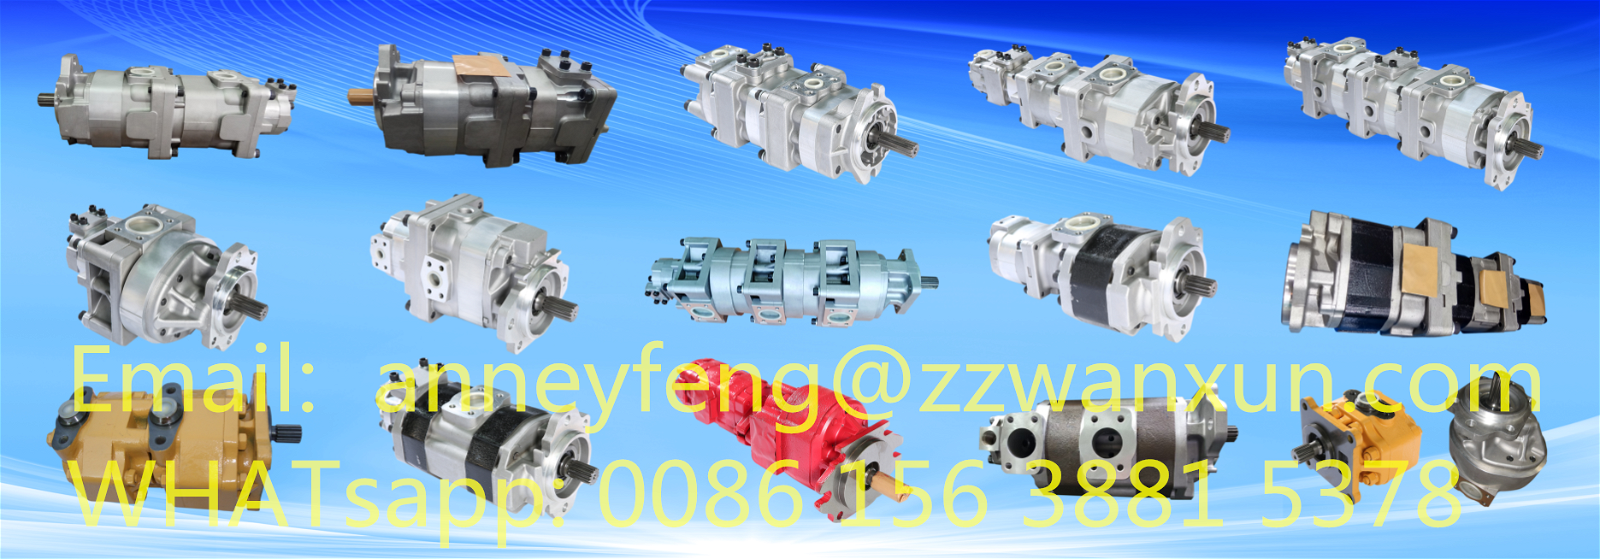 Factory. Dump truck gear pump 705-95-07081 and 705-95-07031 or 705-95-07120. 5